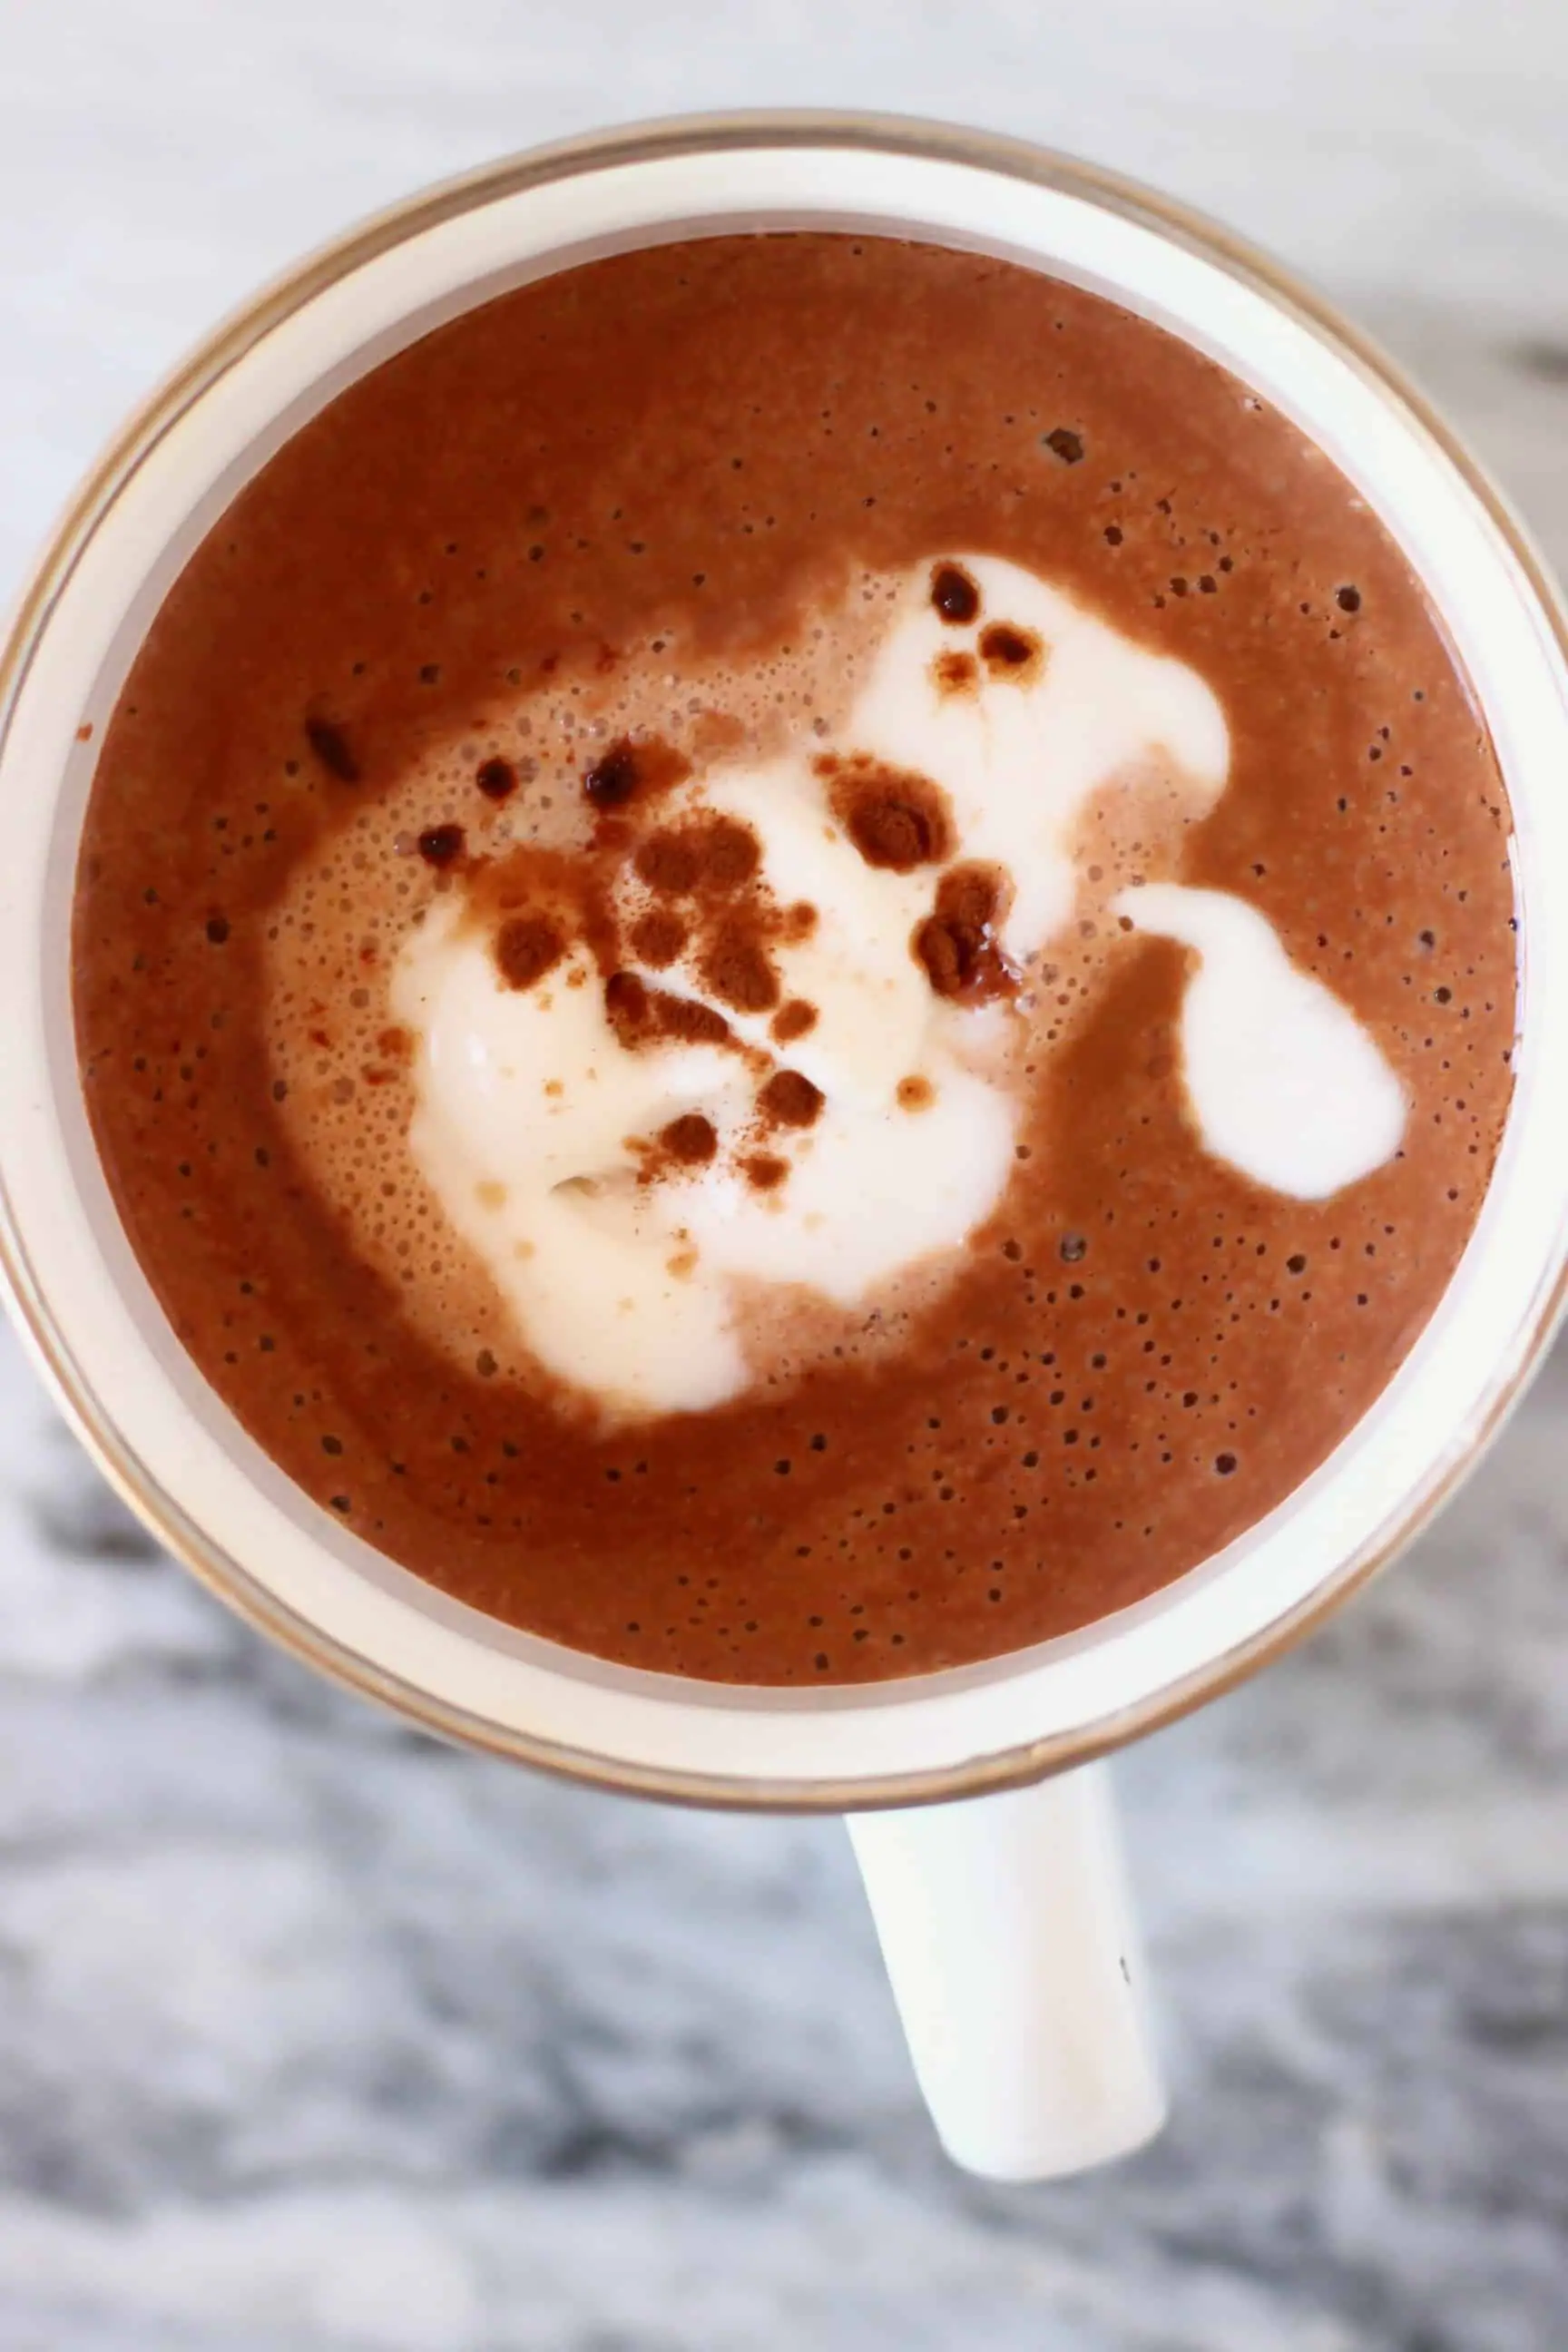 Red wine hot chocolate topped with cream and cocoa powder in a white mug against a marble background